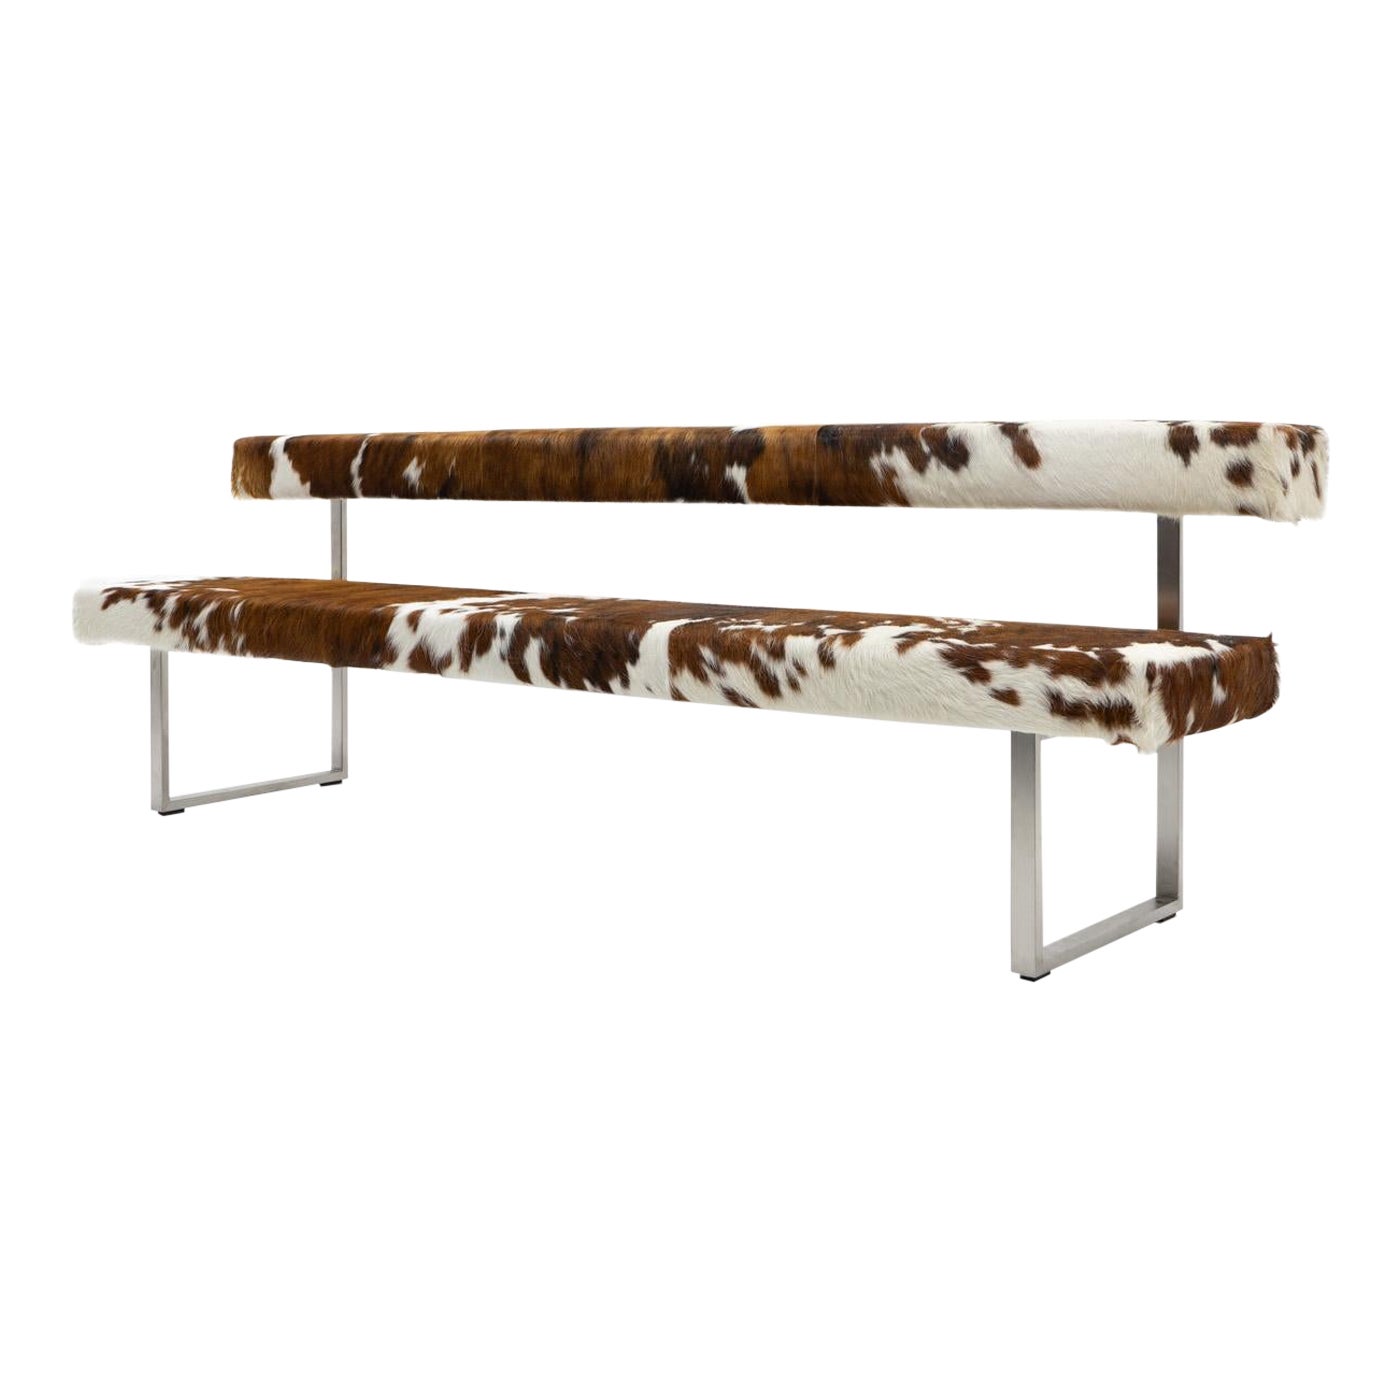 Swiss Design Permesso Bench in cowhide, by Girsberger - 2000s For Sale